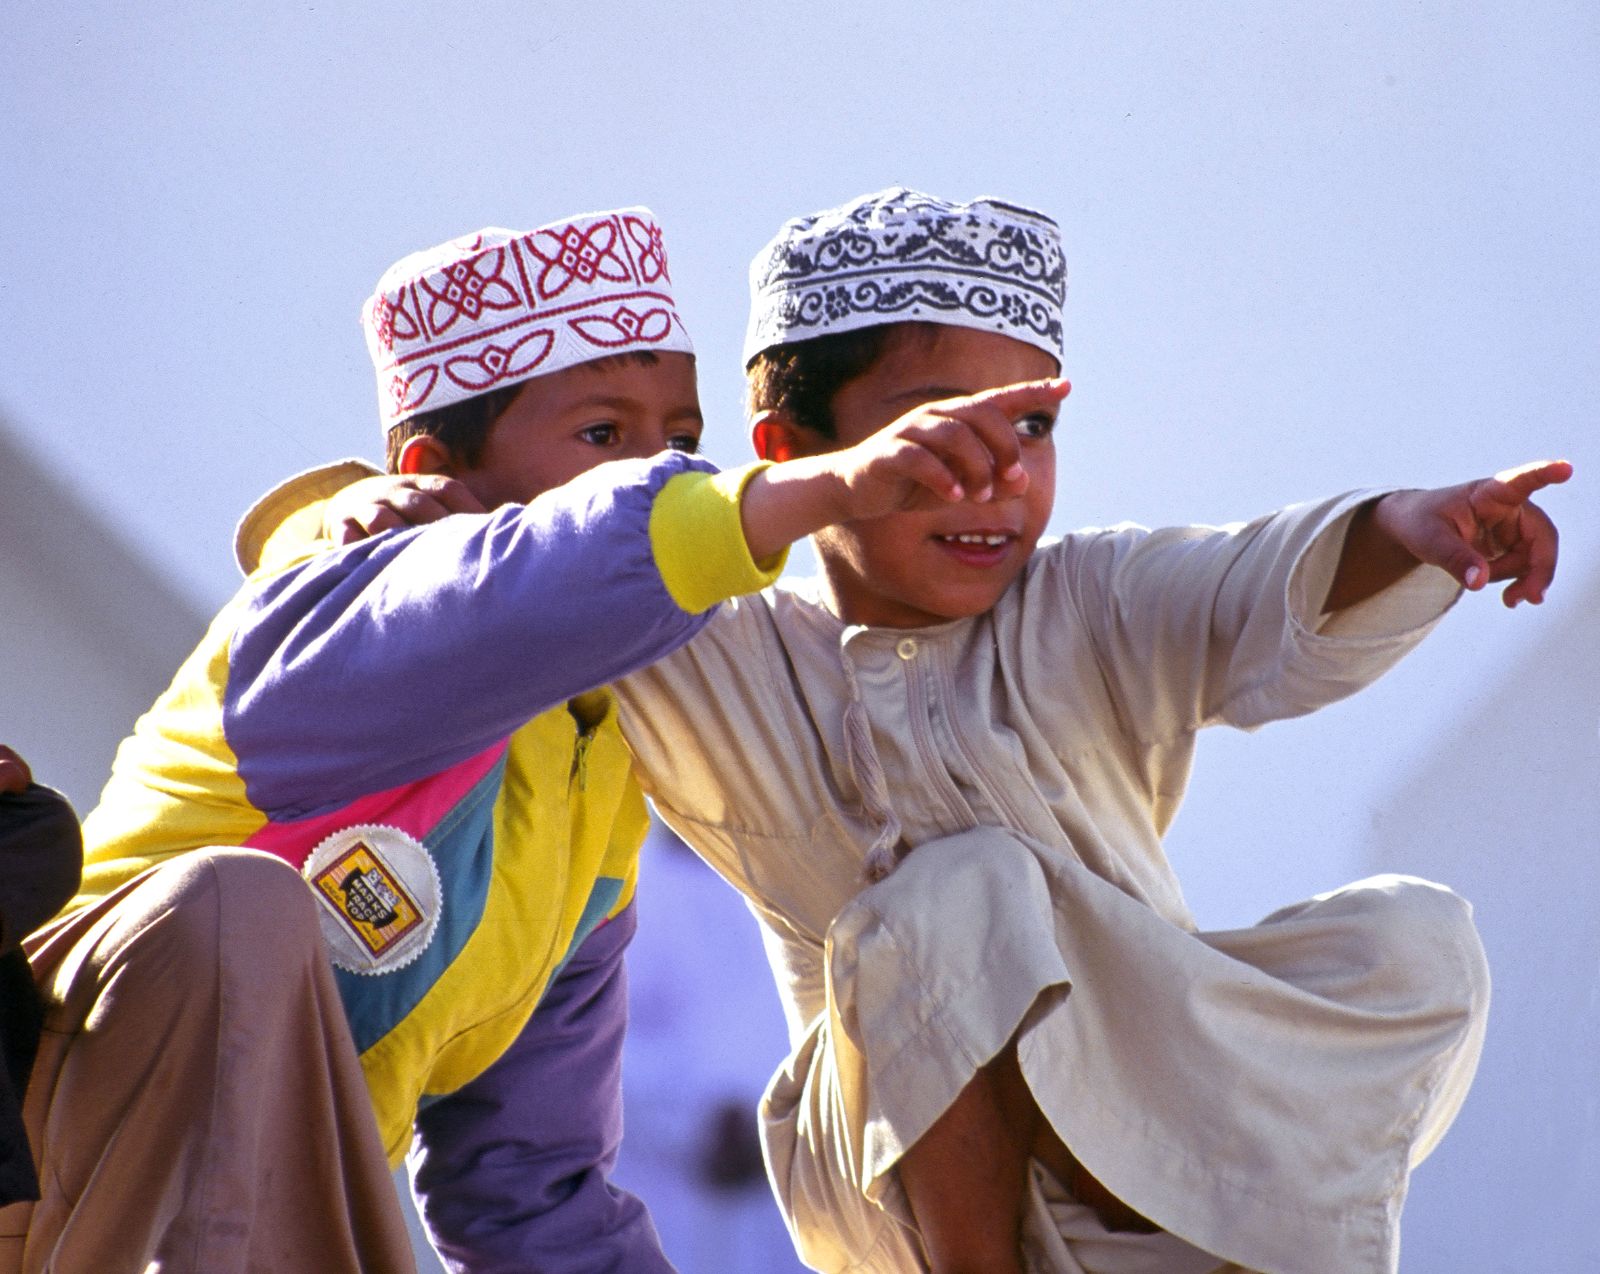 Local children wearing traditionall garments in Oman